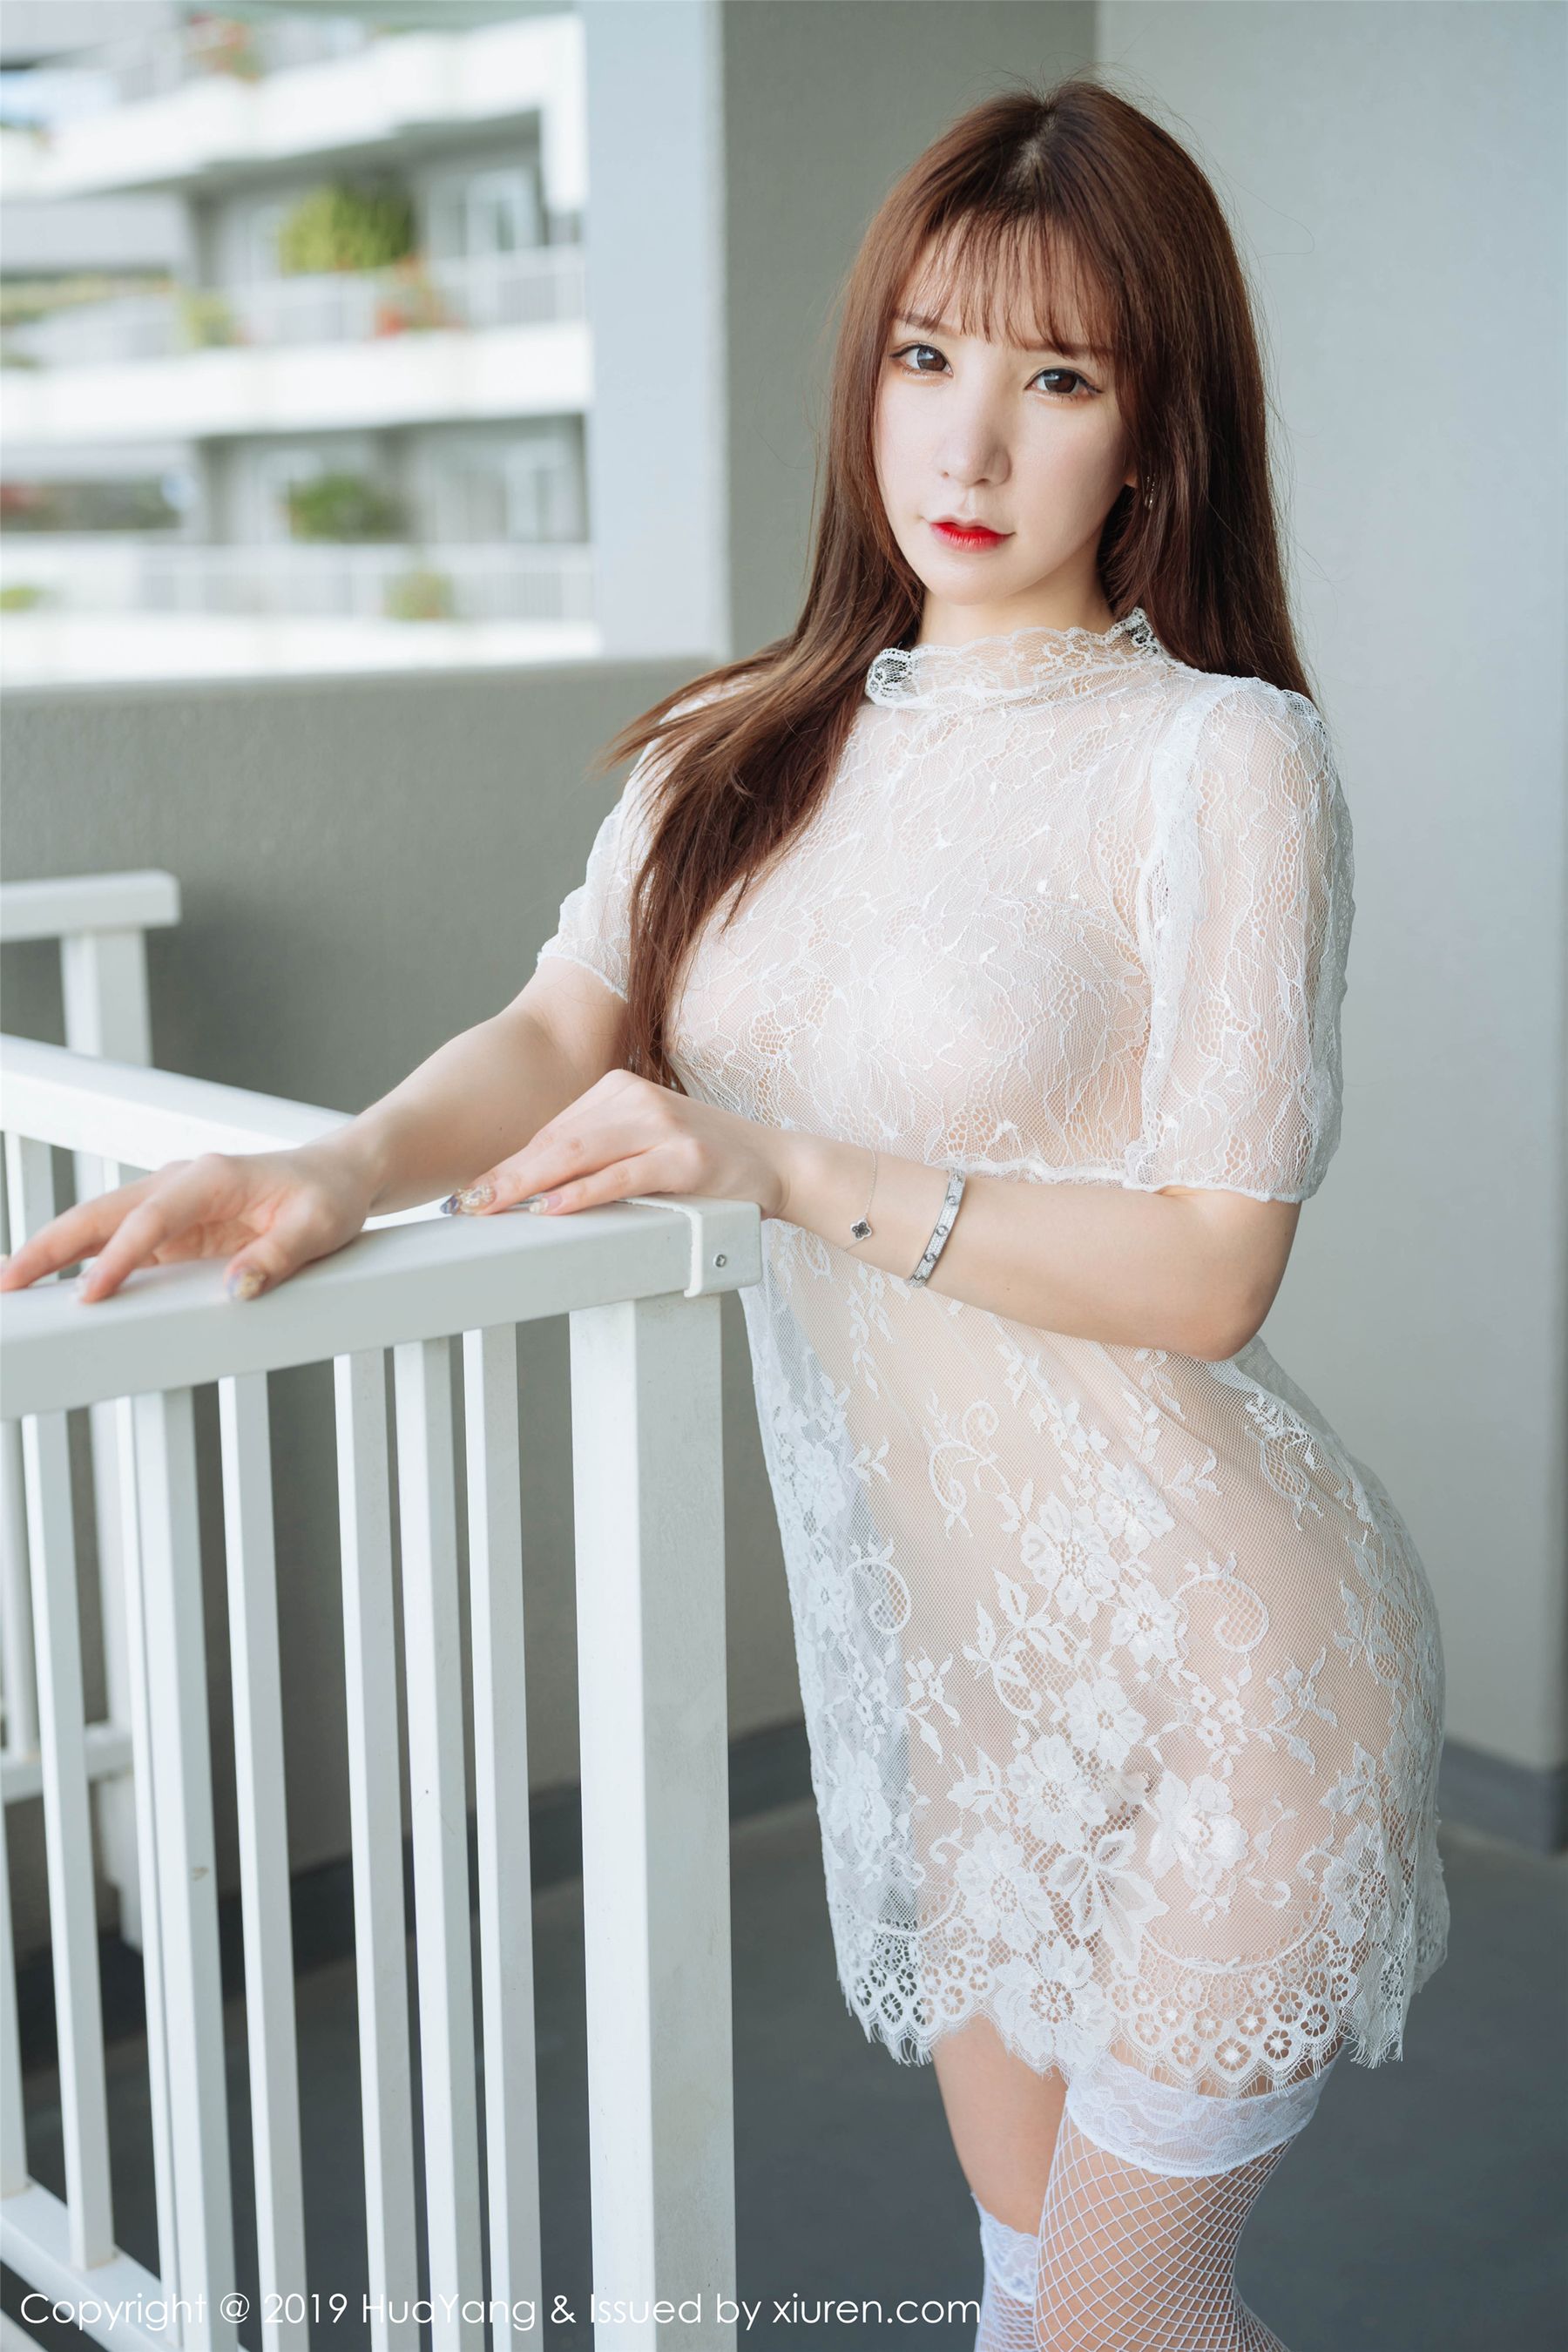 Zhou Yuxi Sandy “Exquisite Hollow Underwear and Lace Net Stockings” (花洋HuaYang) Vol.169 Photo Album